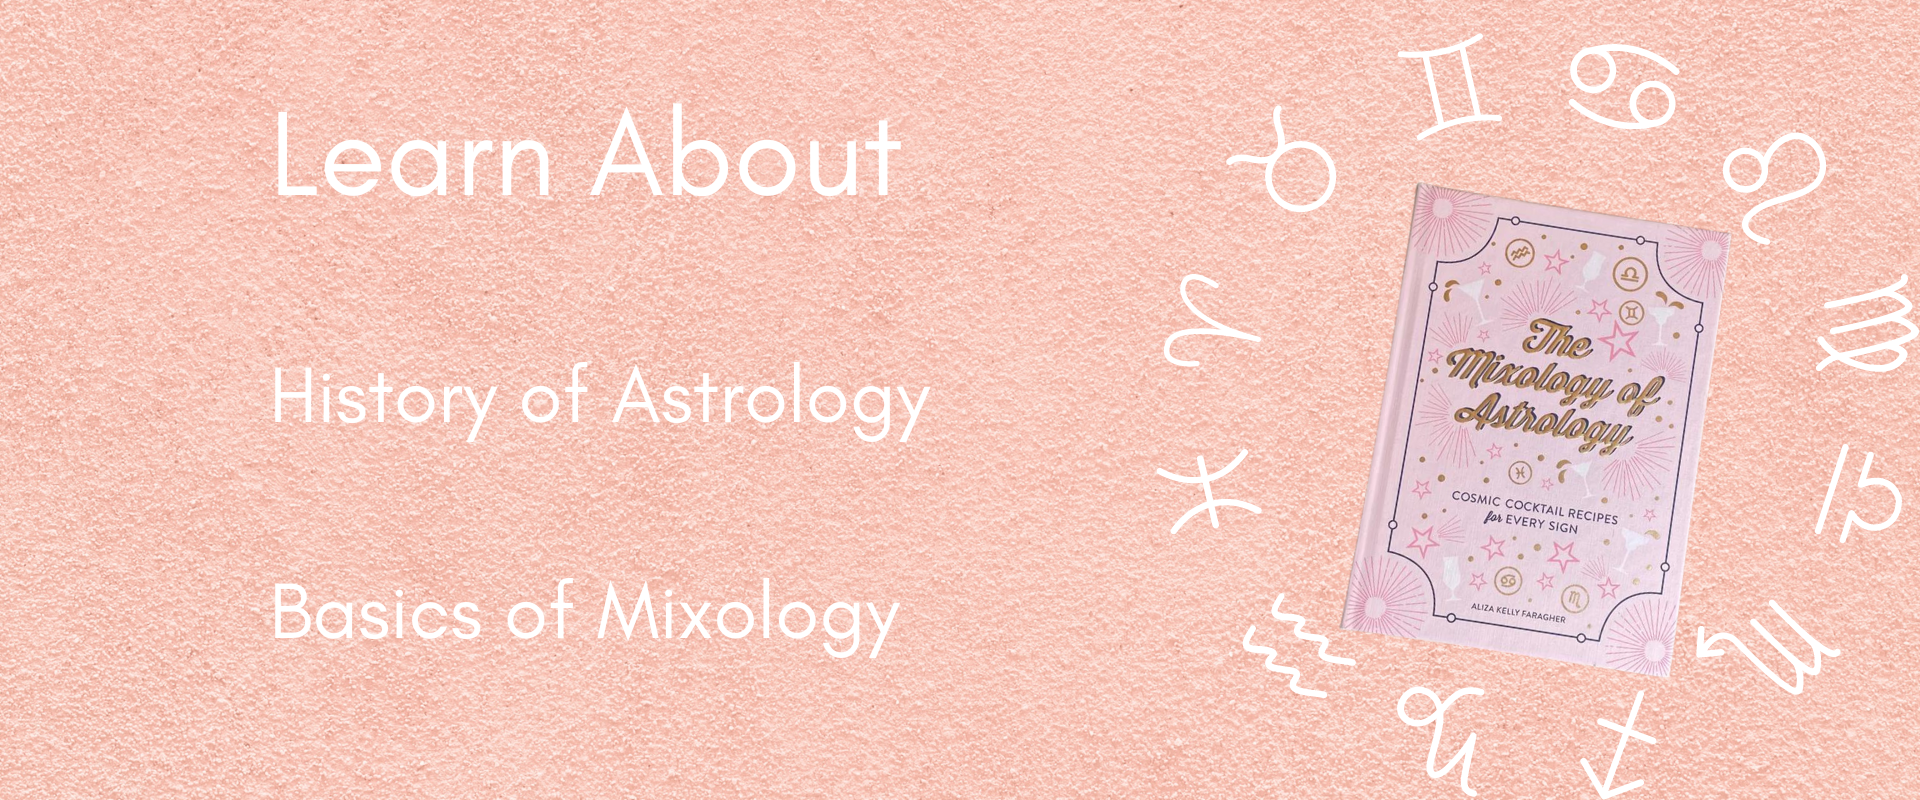 Pink book, the Mixology of Astrology with zodiac signs about it. Learn about history of astrology, and basics of mixology